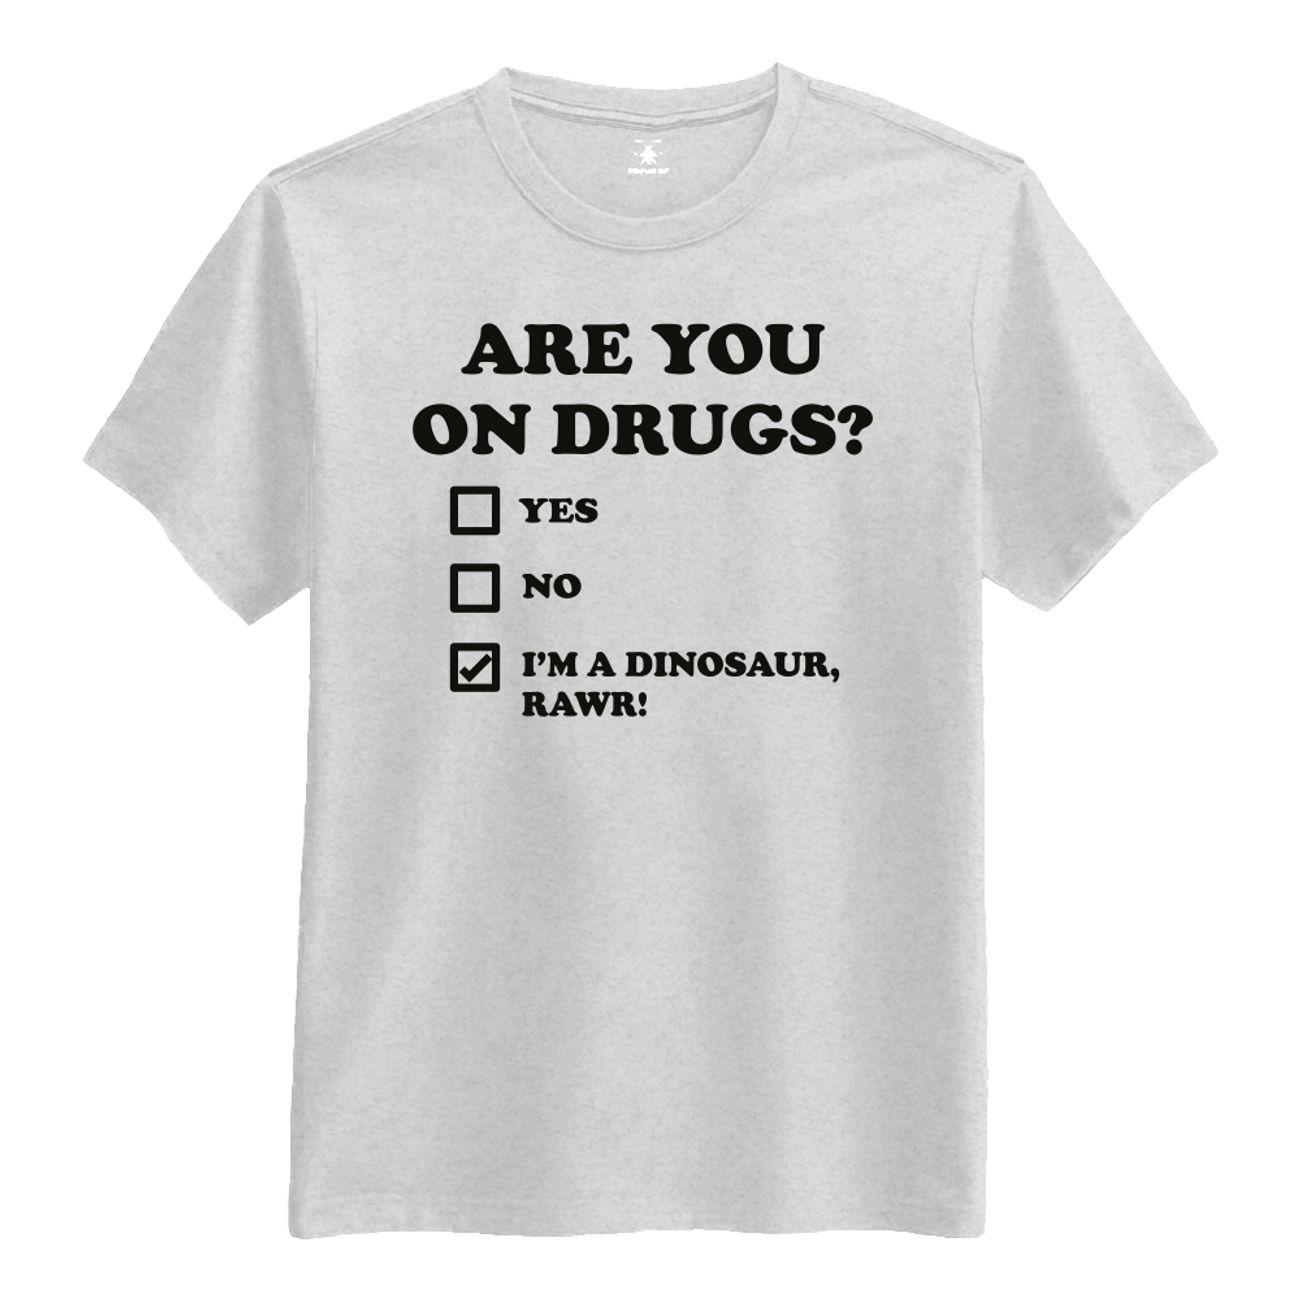 are-you-on-drugs-t-shirt-79380-1